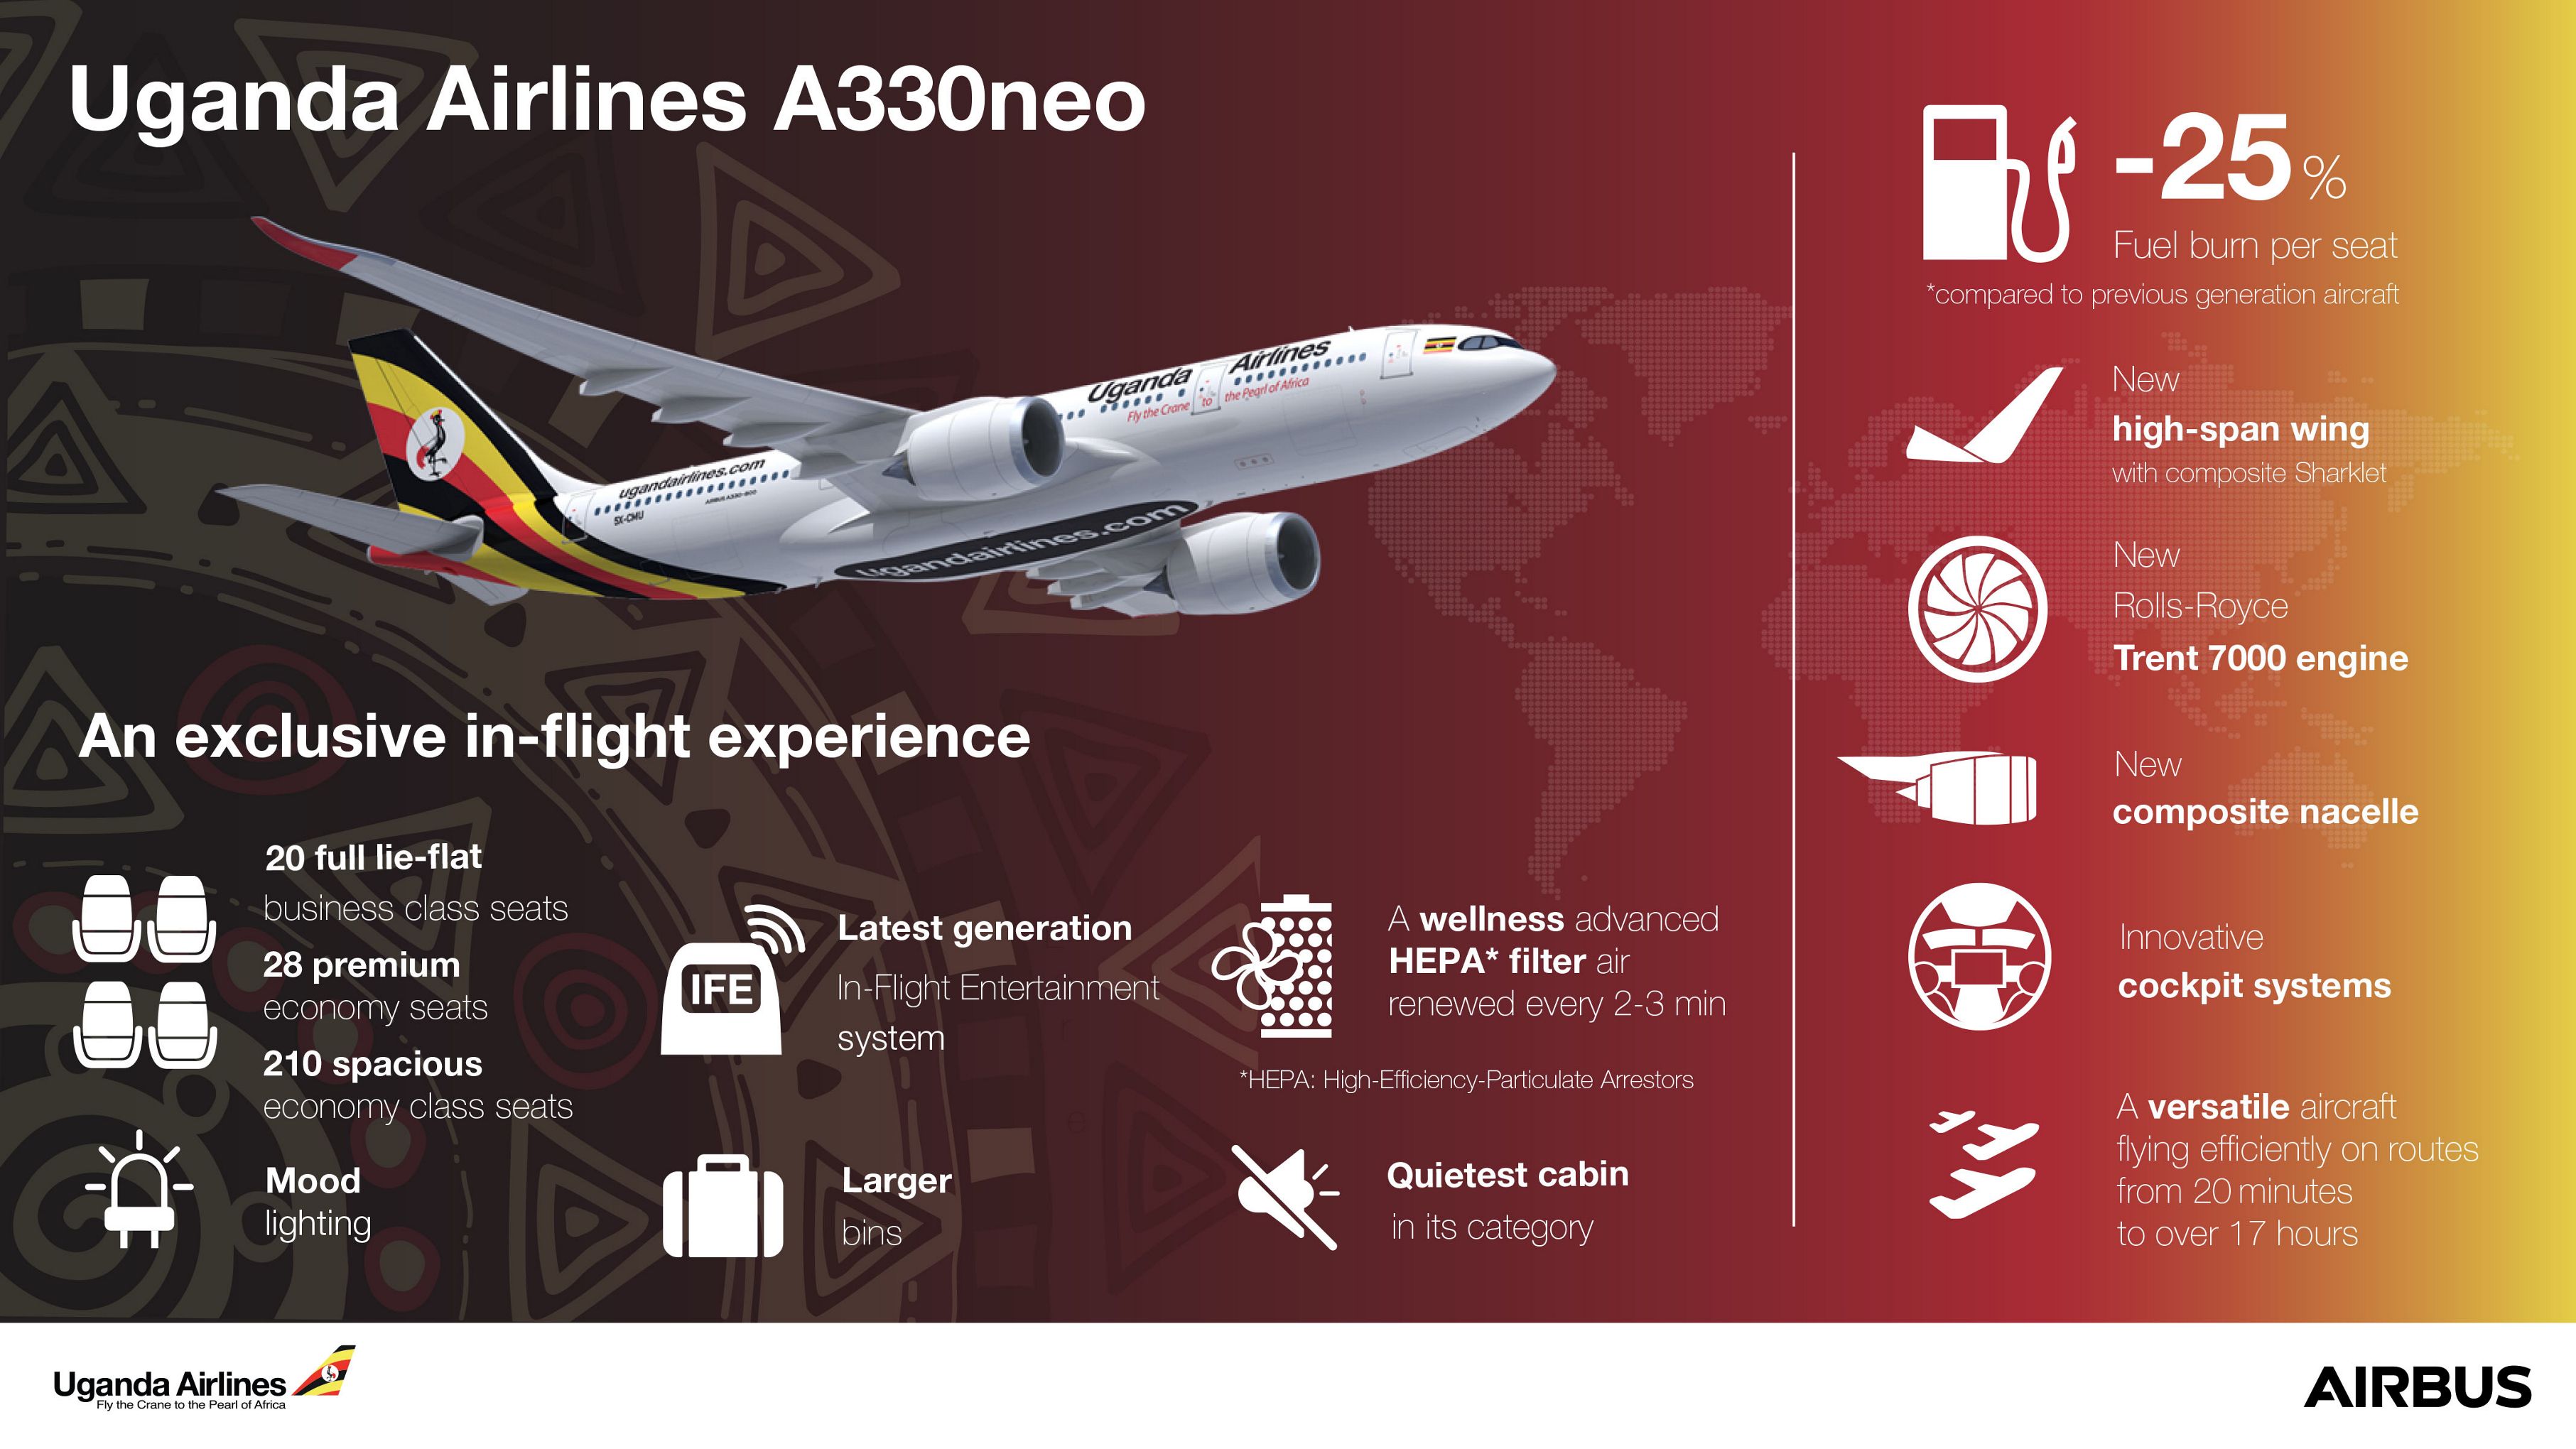 Uganda Airlines Flies Further With Its Brand New A330neo Commercial Aircraft Airbus